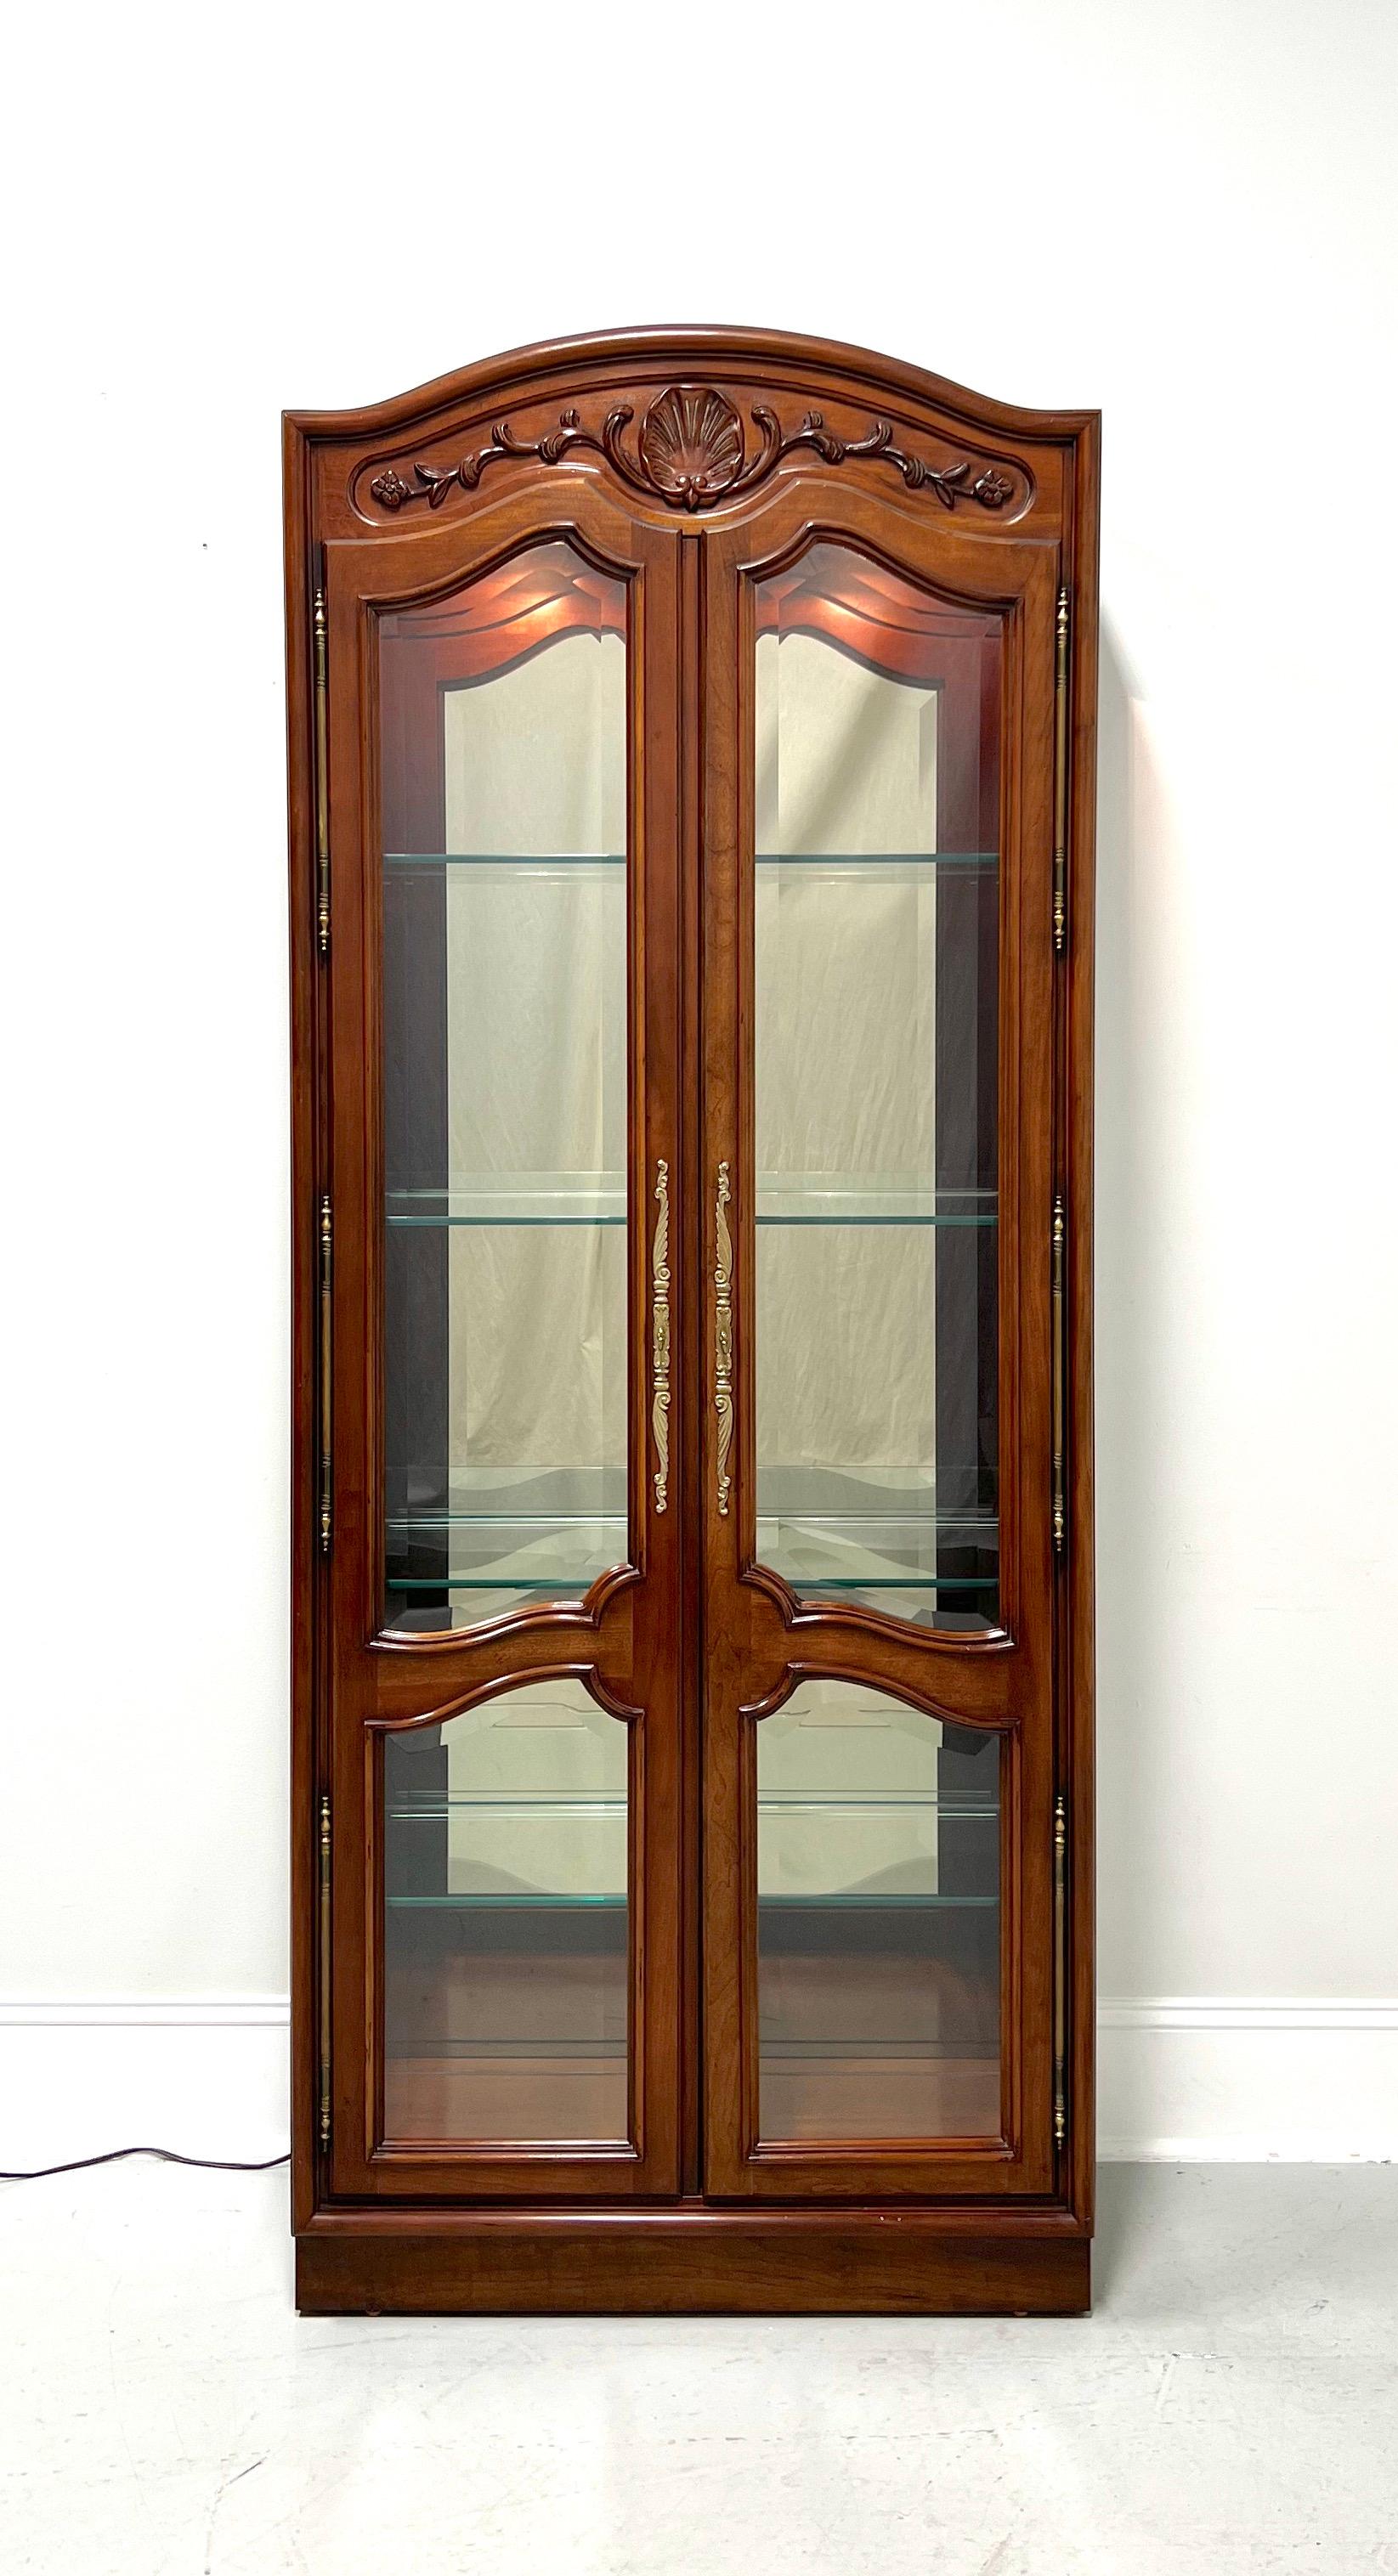 A French Provincial style curio cabinet by Century Furniture, from their Chardeau Collection designed by Raymond K Sobota. Cherry wood with decorative brass hardware, dual arched glass front doors, arched glass side panels, carved top with shell